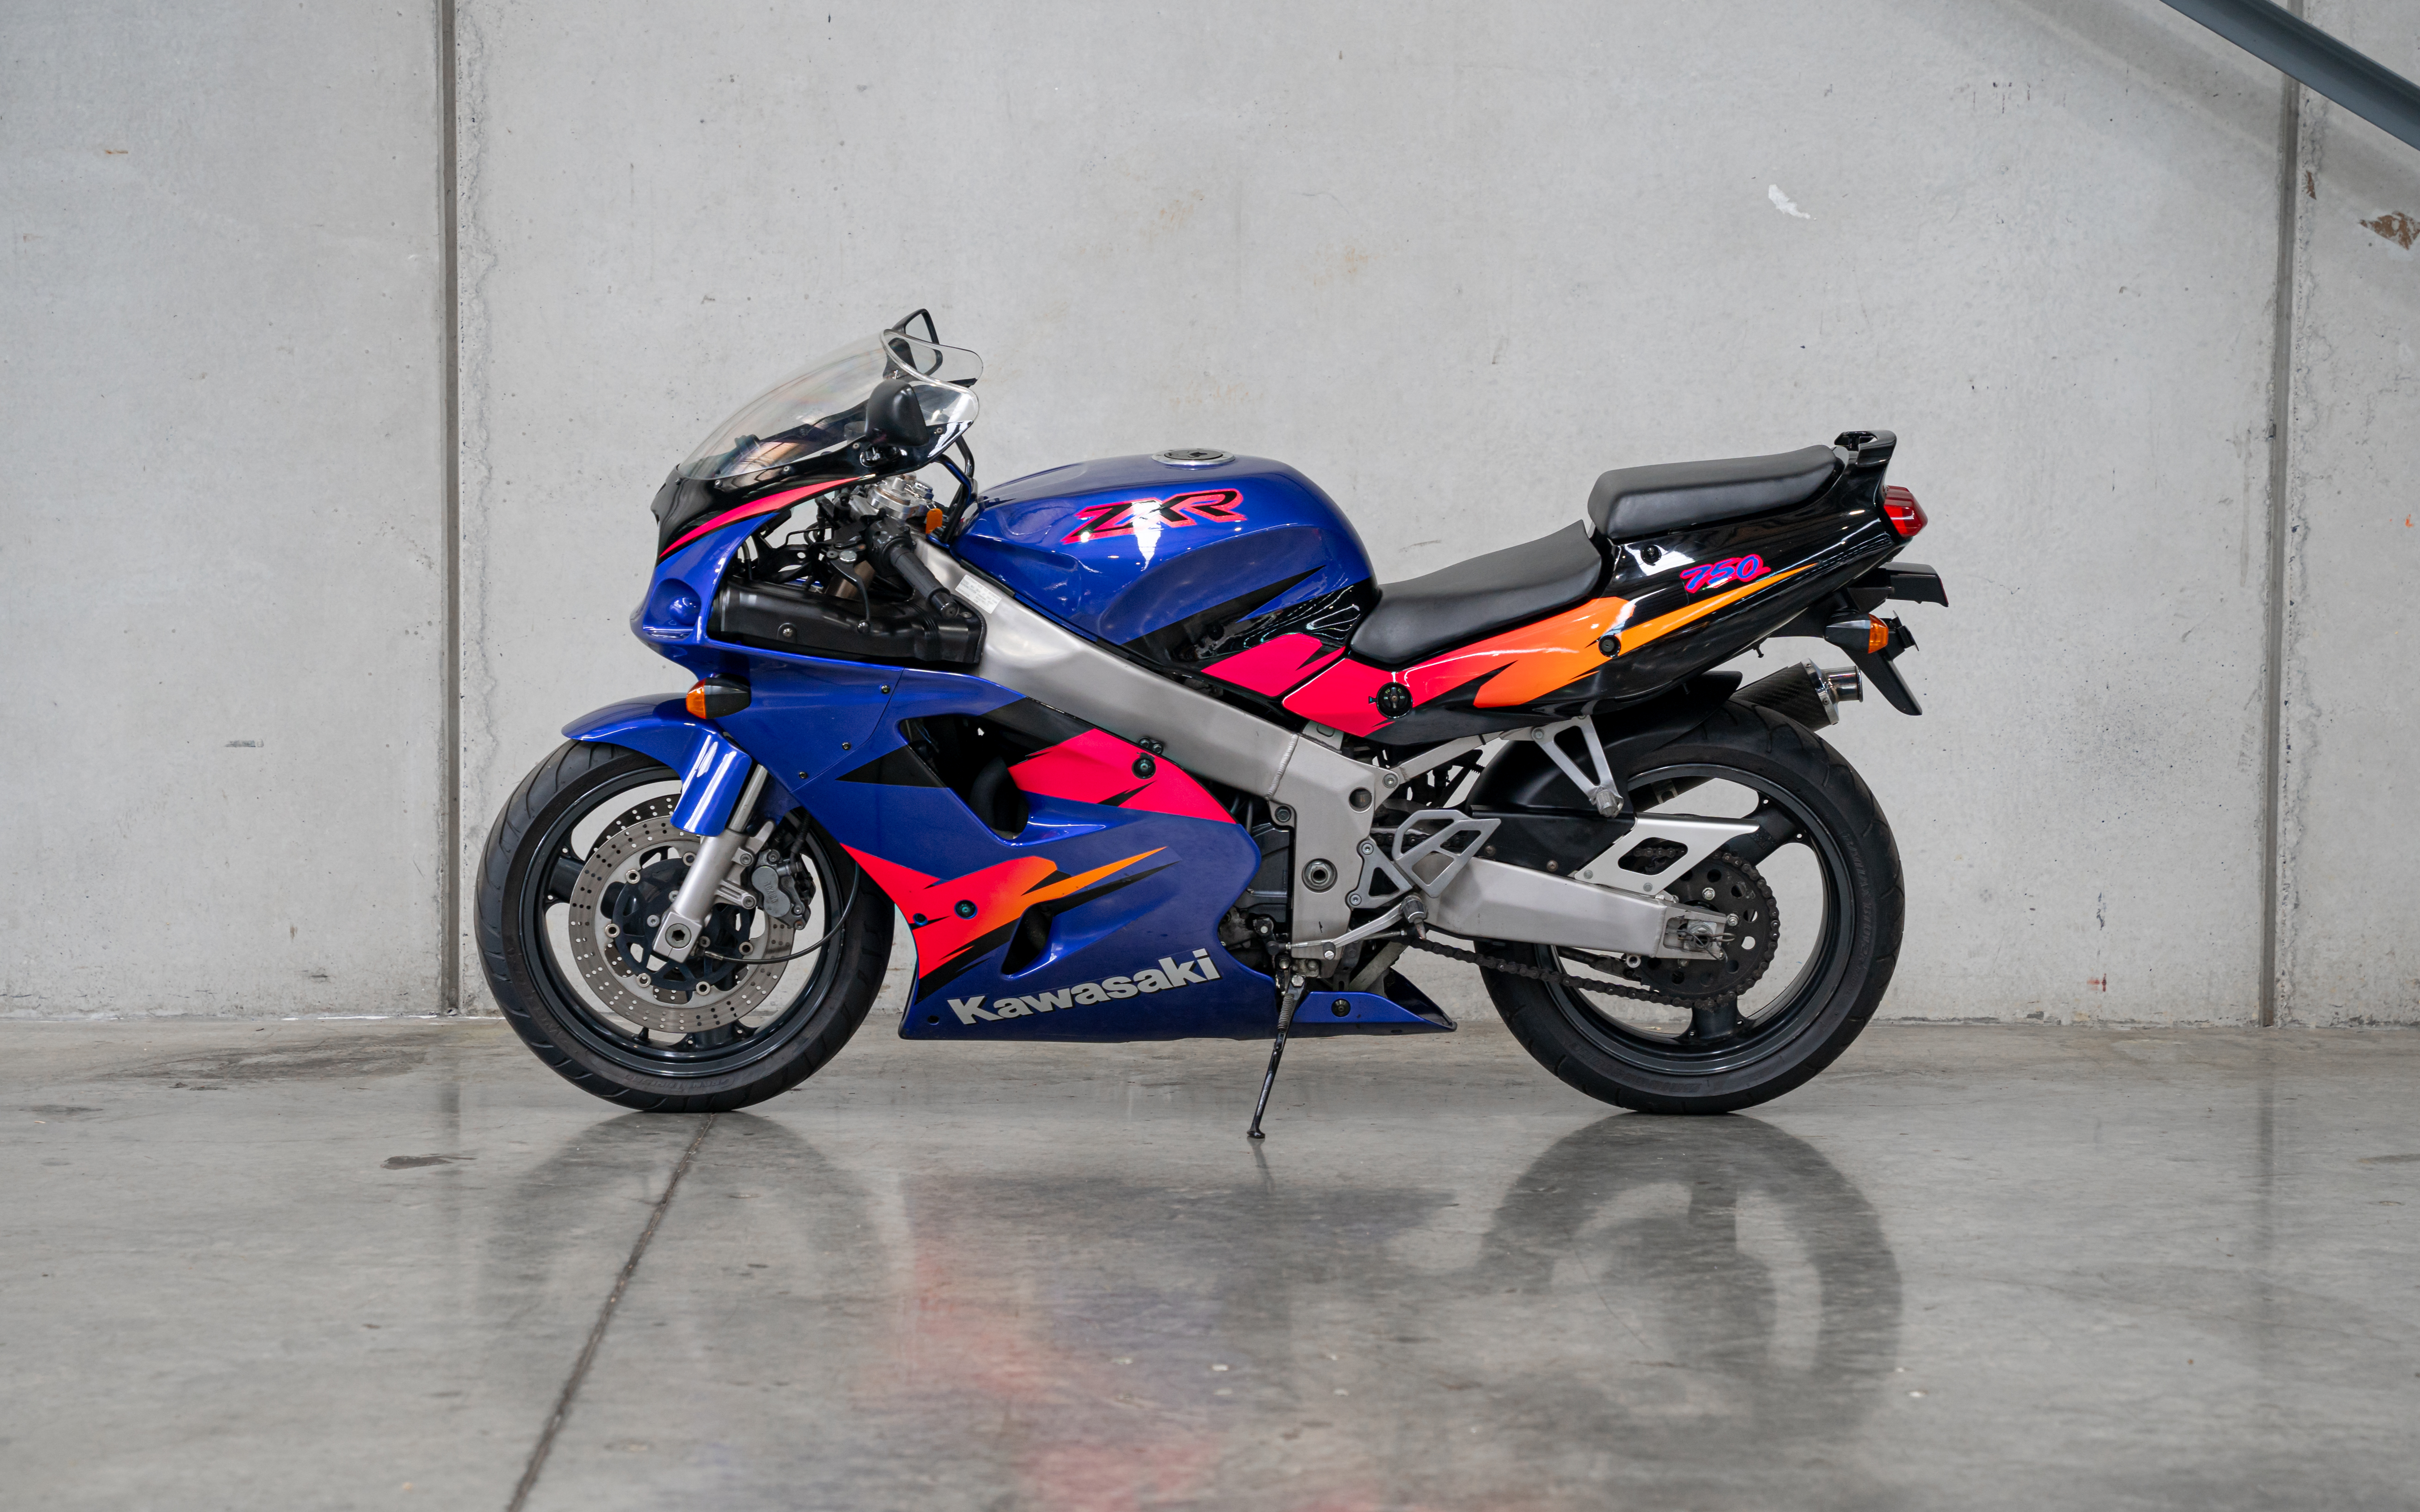 1995 Kawasaki ZXR 750 for sale by auction in Melbourne, VIC, Australia